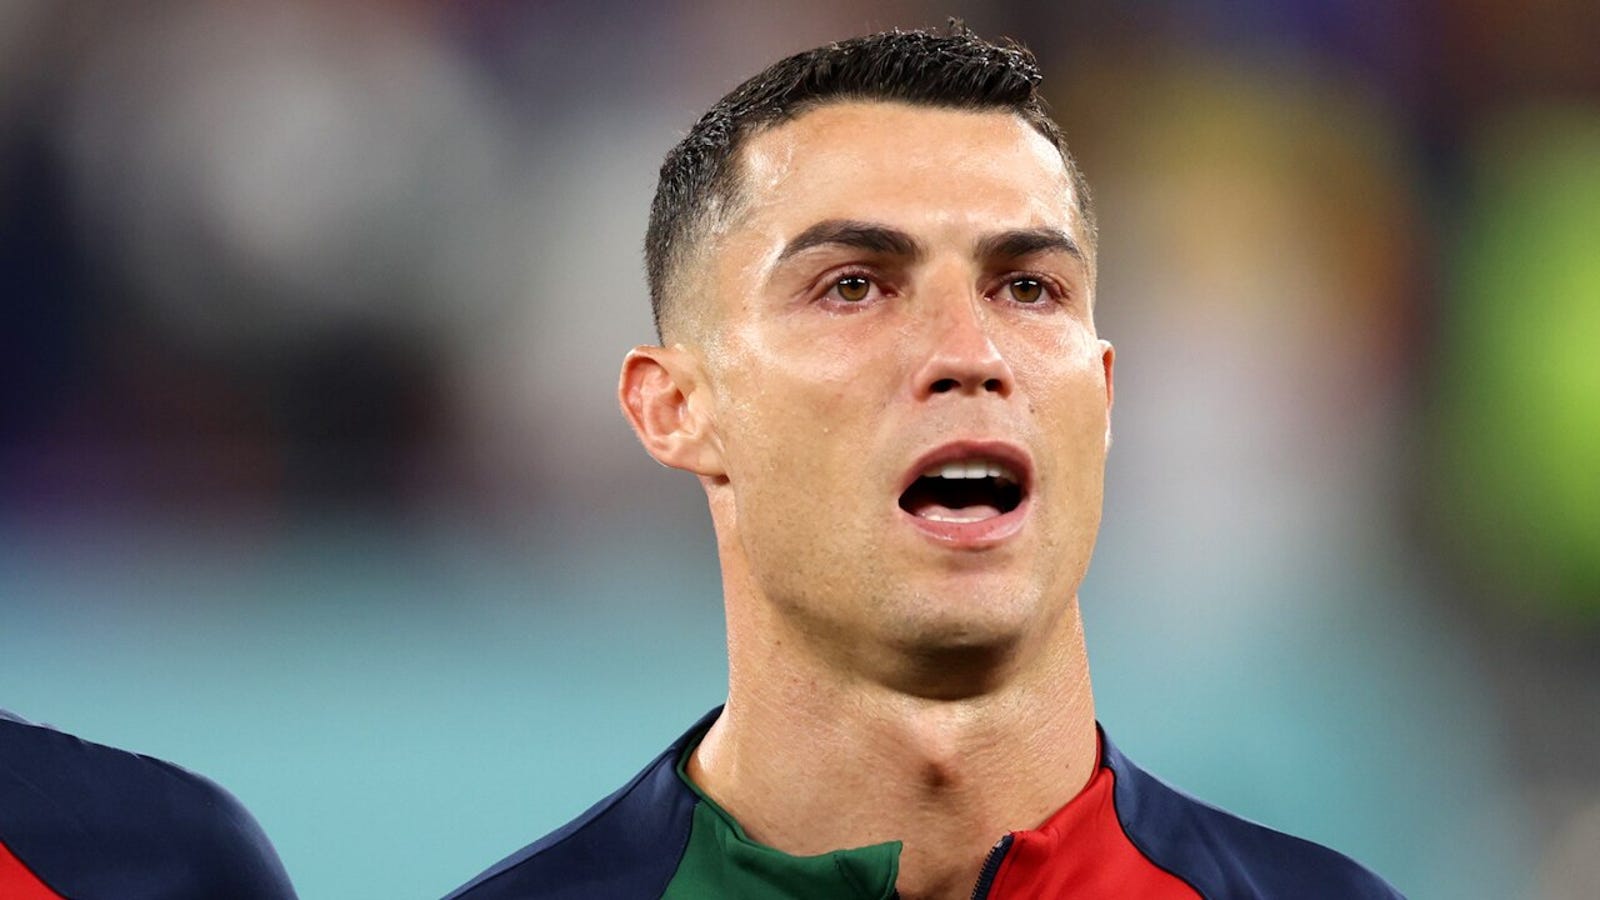 Cristiano Ronaldo crying during the Portugal national anthem